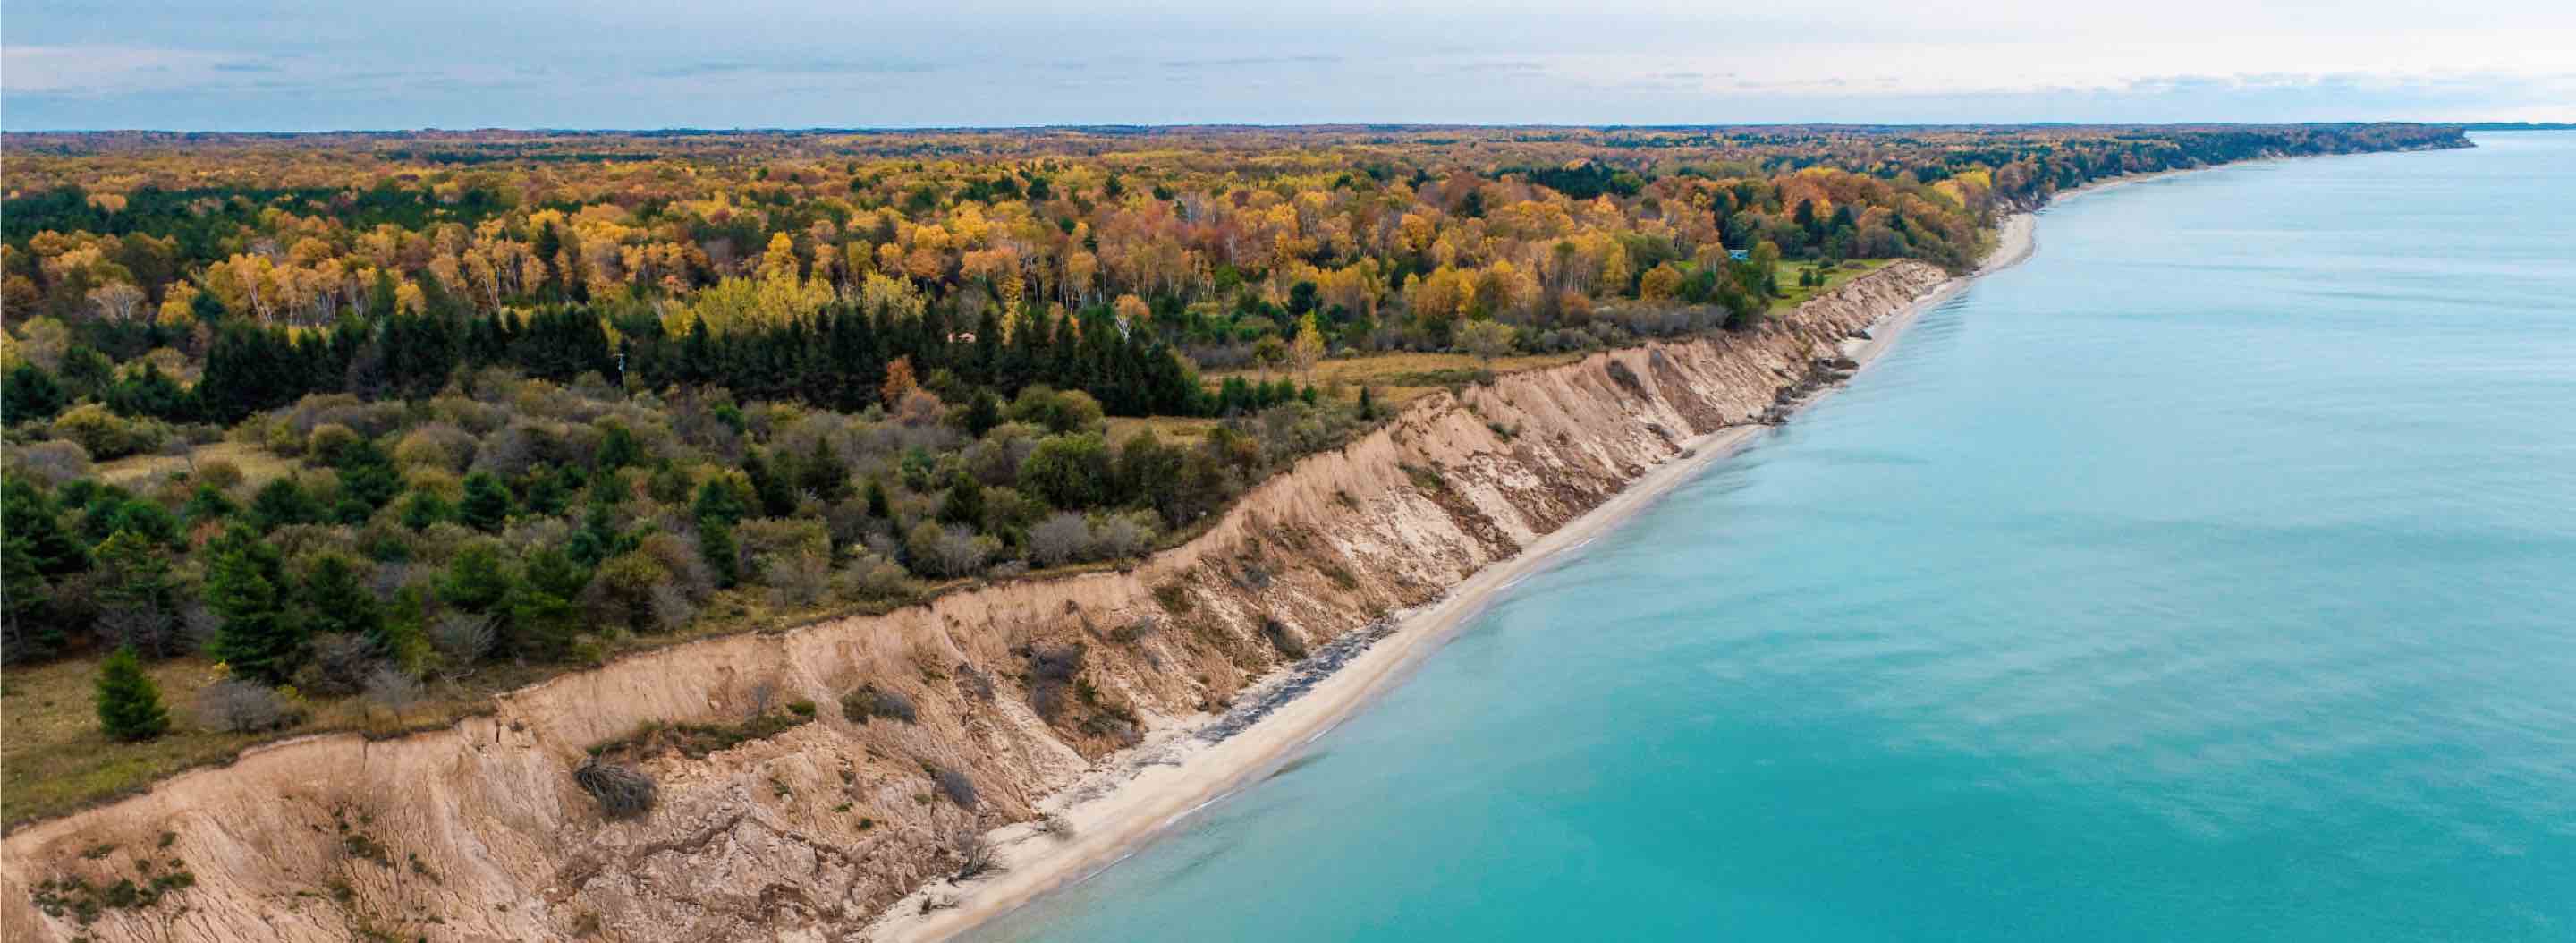 An aerial view of a Lake Michigan shoreline with dunes and trees in the background